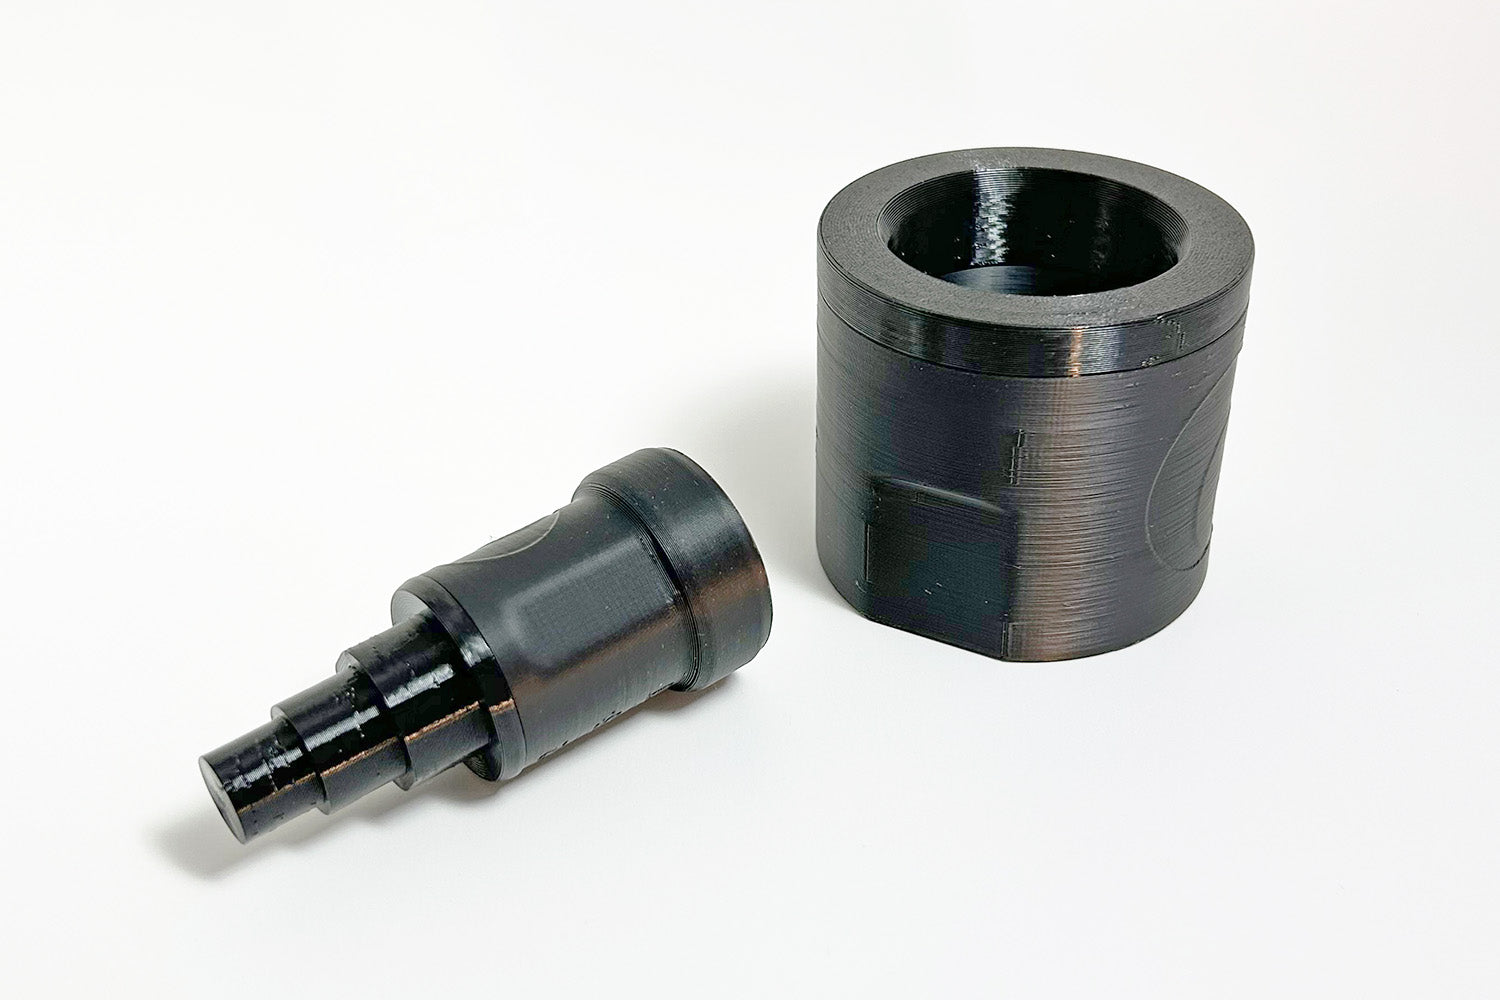 Our Wheel Hub Axle Removal Tool + Hub Support are made of high impact resistance and rigid "soft touch" thermoplastics. This gives an extra protection so you don’t scratch your hub or dent your axle while proceeding with your maintenance.